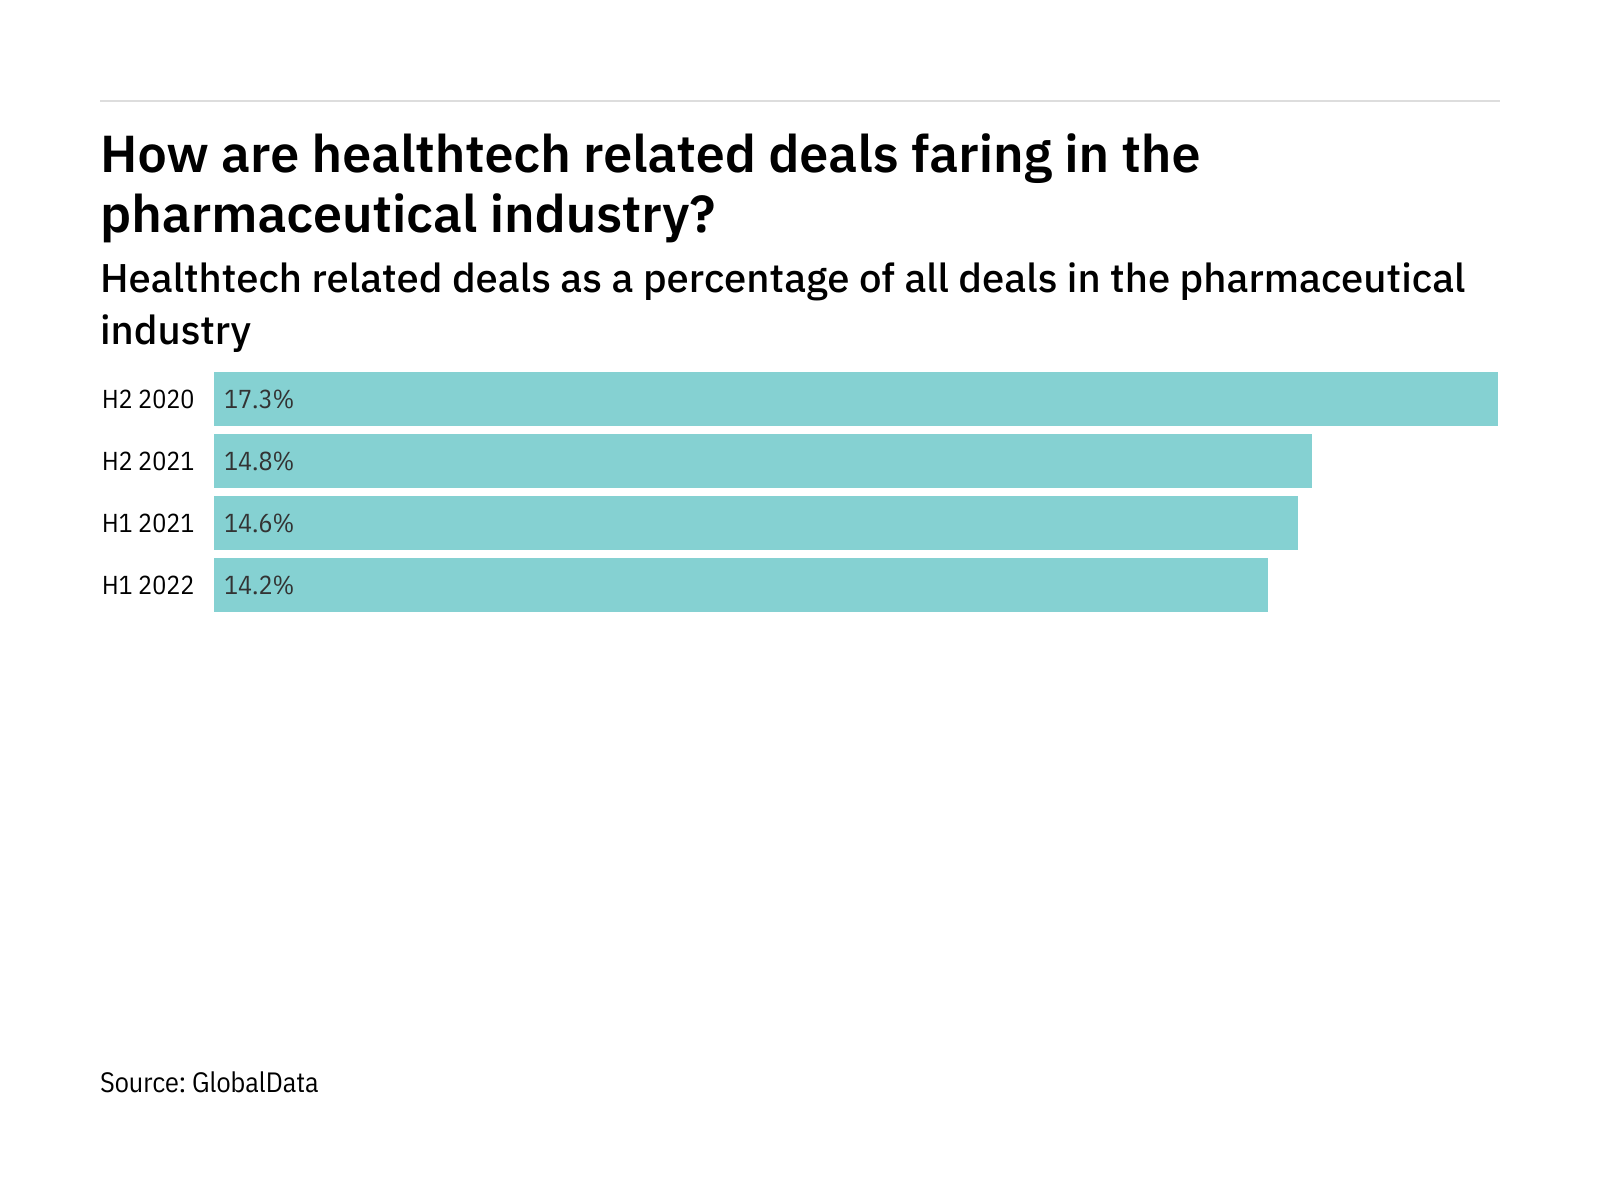 Healthtech deals decreased significantly in the pharma industry in H1 2022